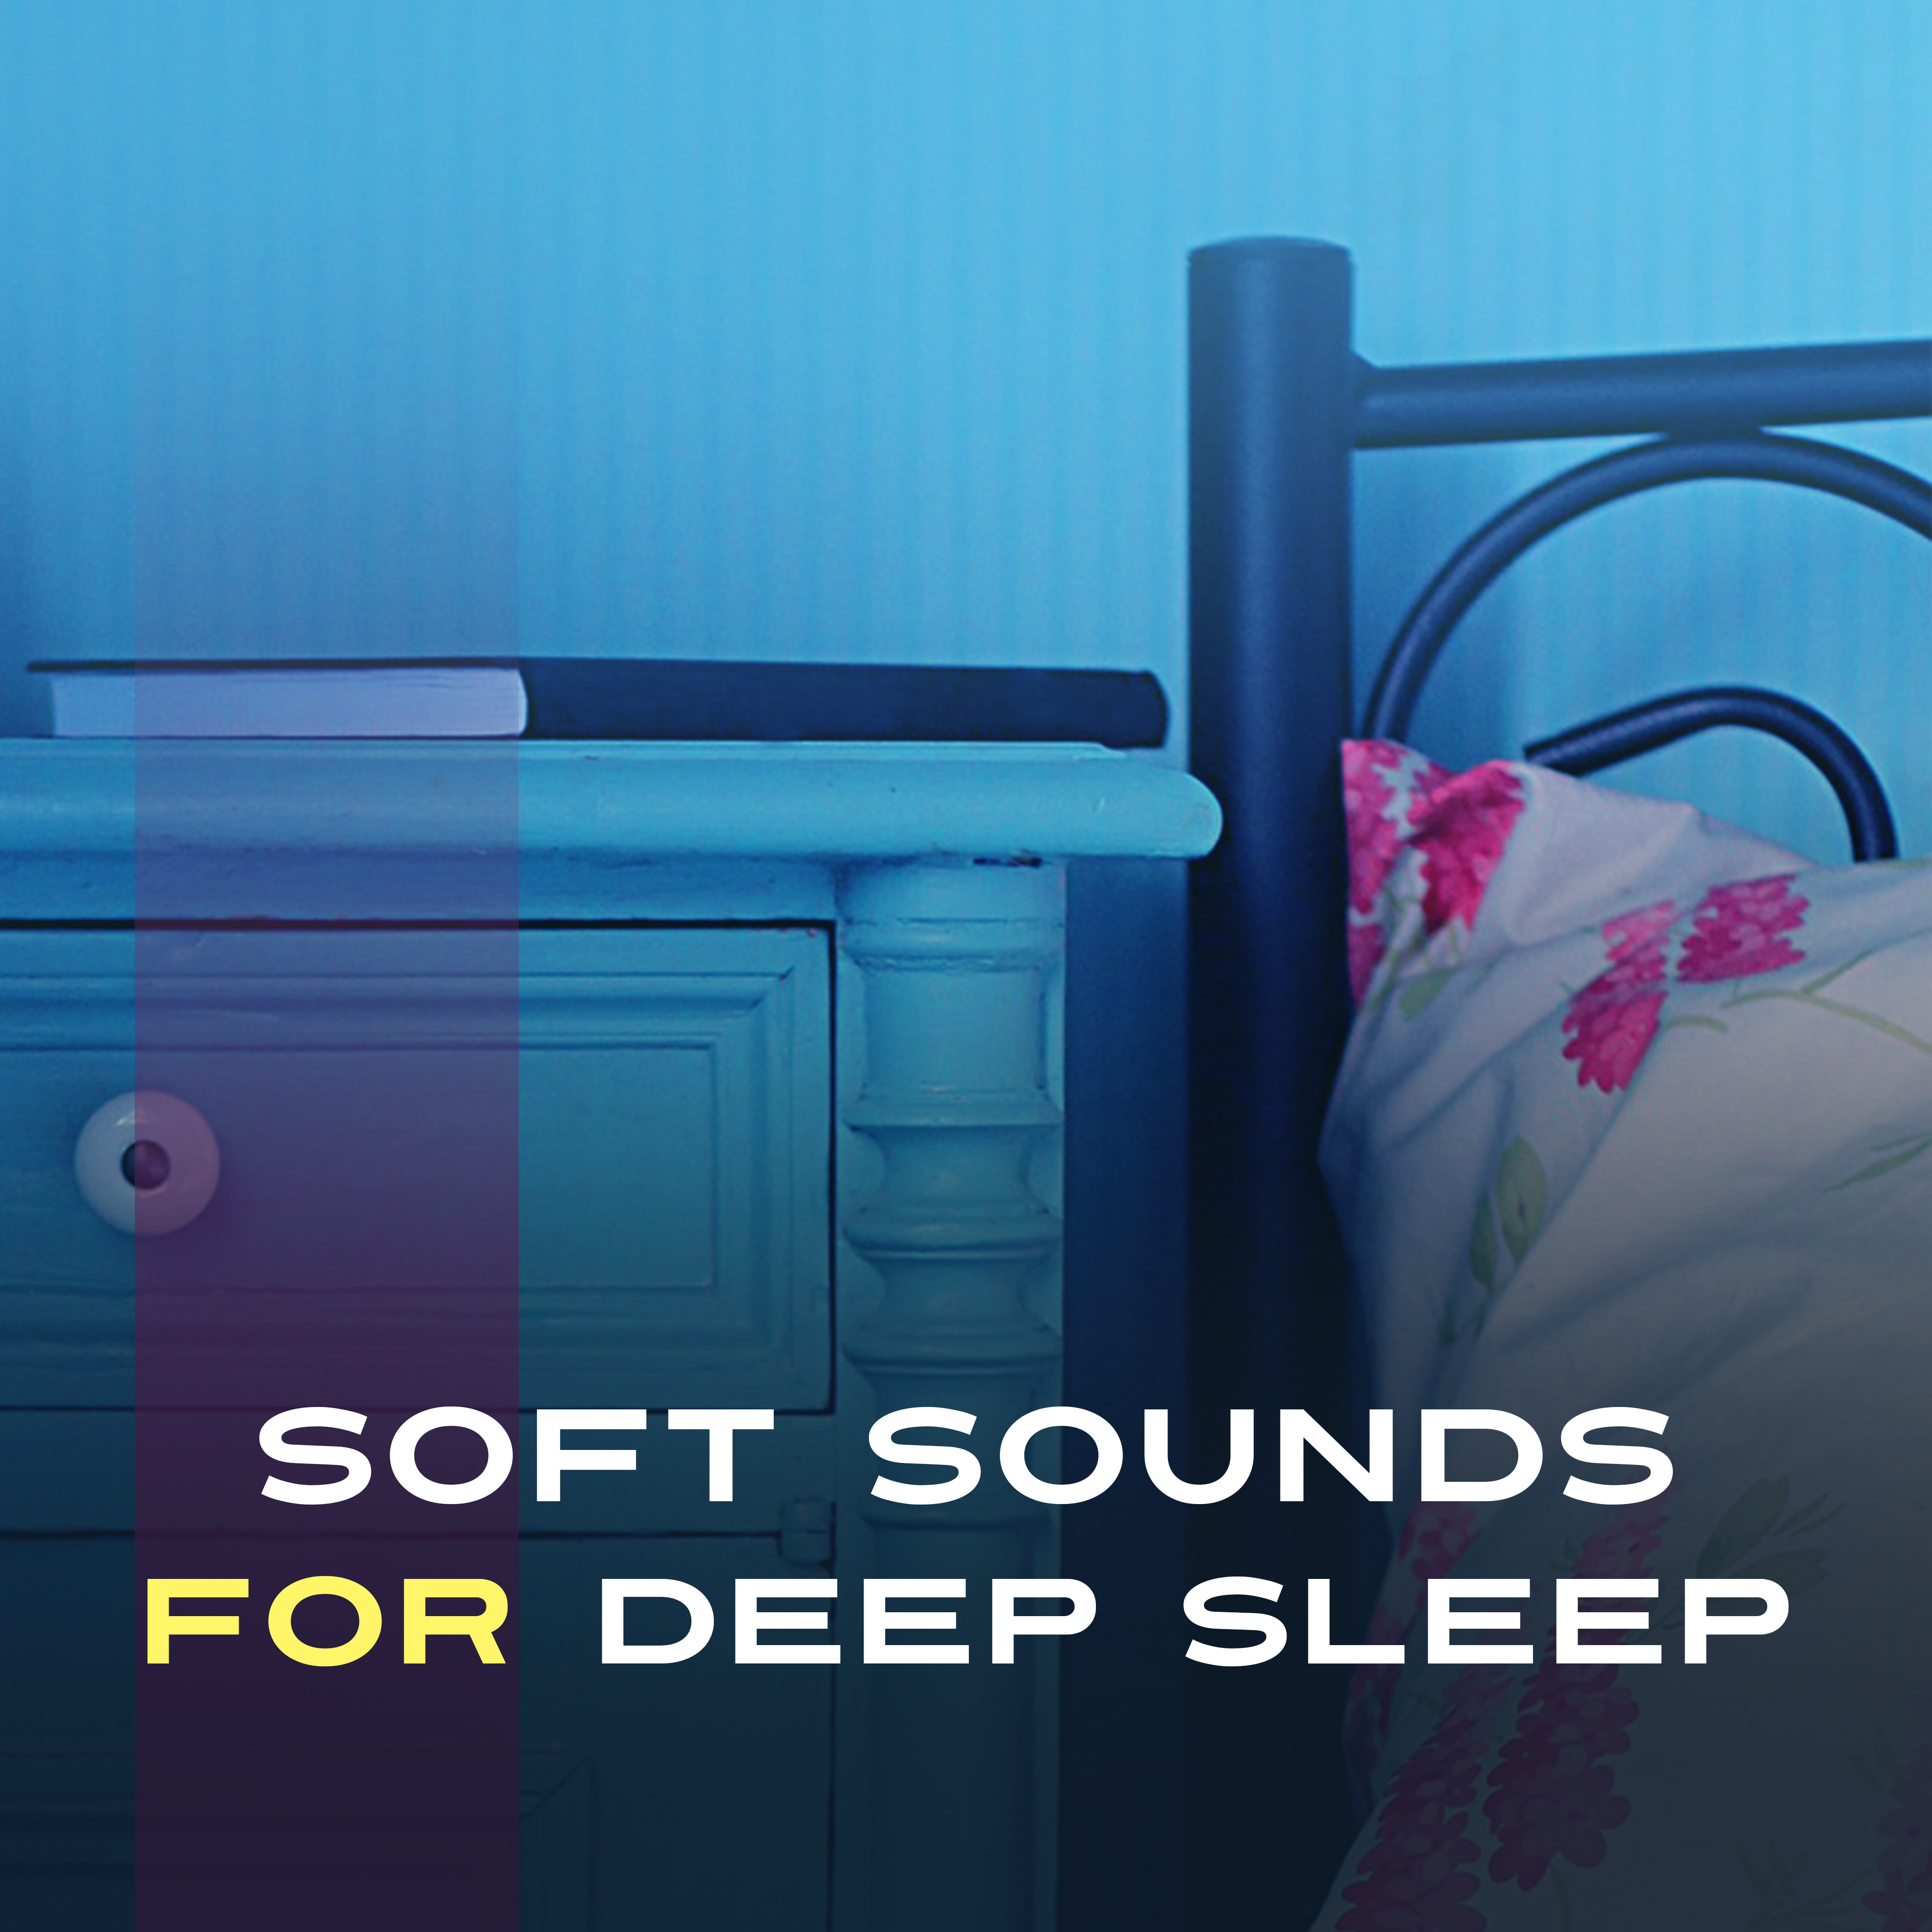 Soft Sounds for Deep Sleep – Calm Down & Relax, Music to Rest, New Age Sleeping, Dreaming Time